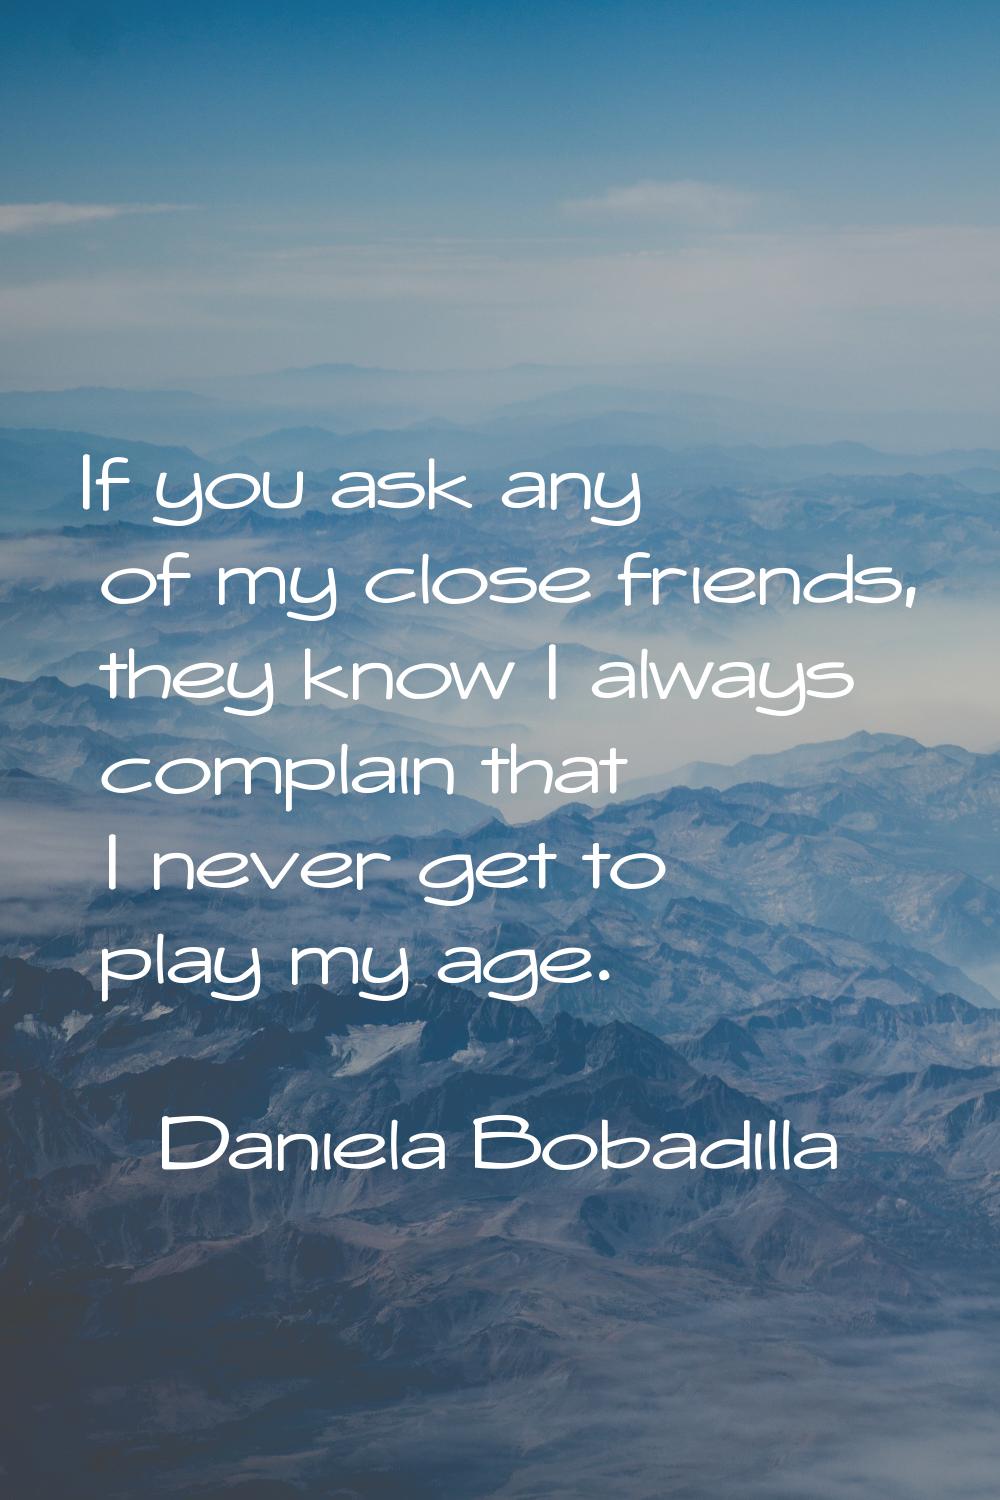 If you ask any of my close friends, they know I always complain that I never get to play my age.